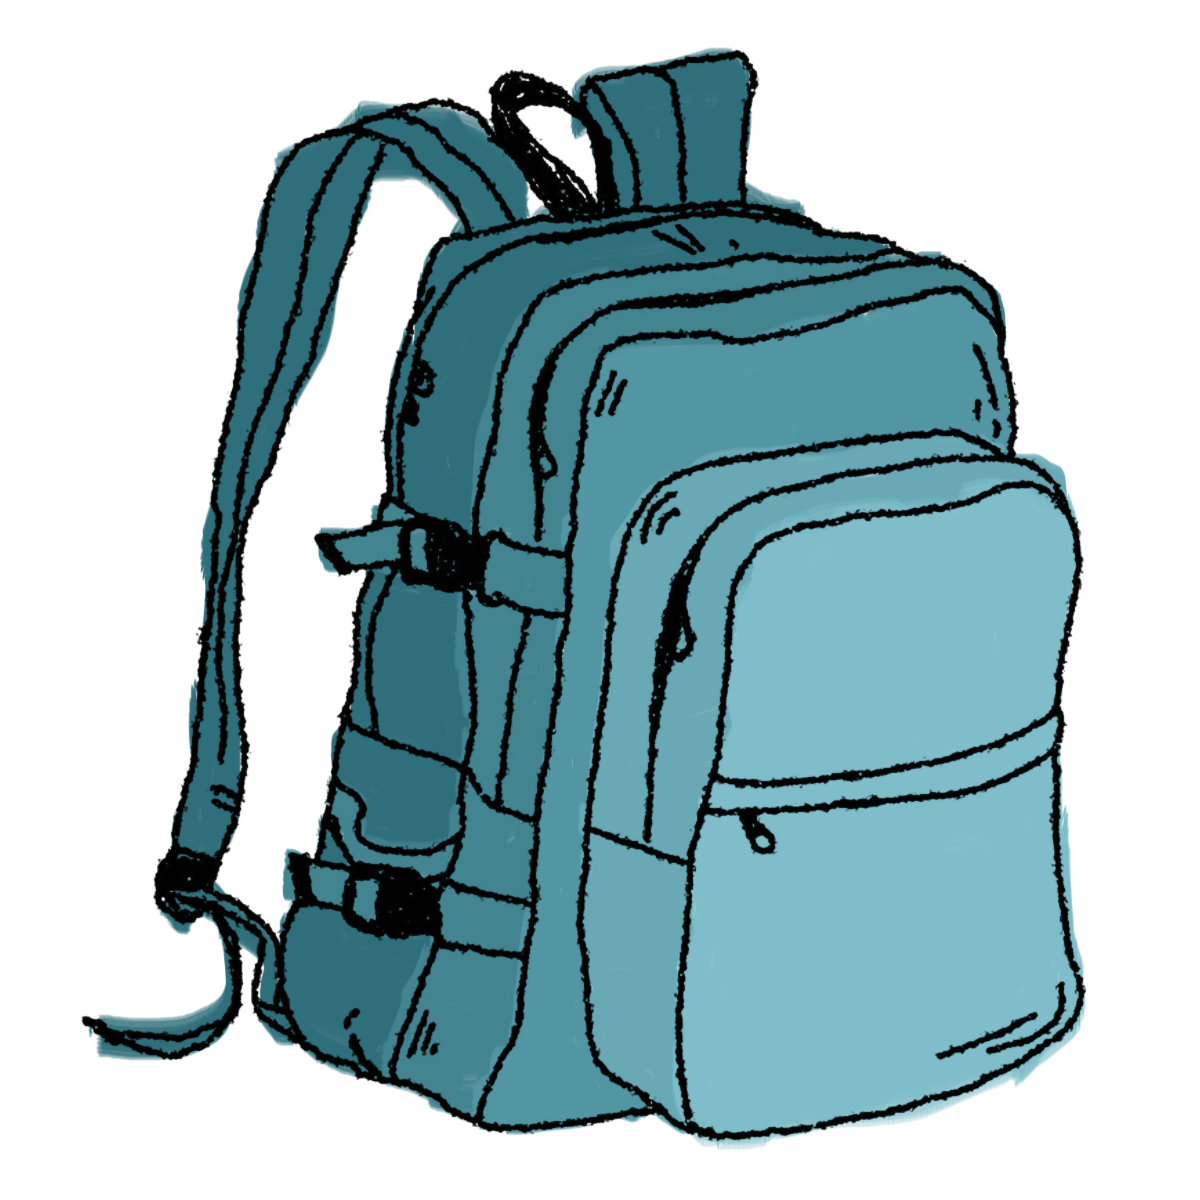 Backpack hiking bag clipart galleryhip com the hippest galleries